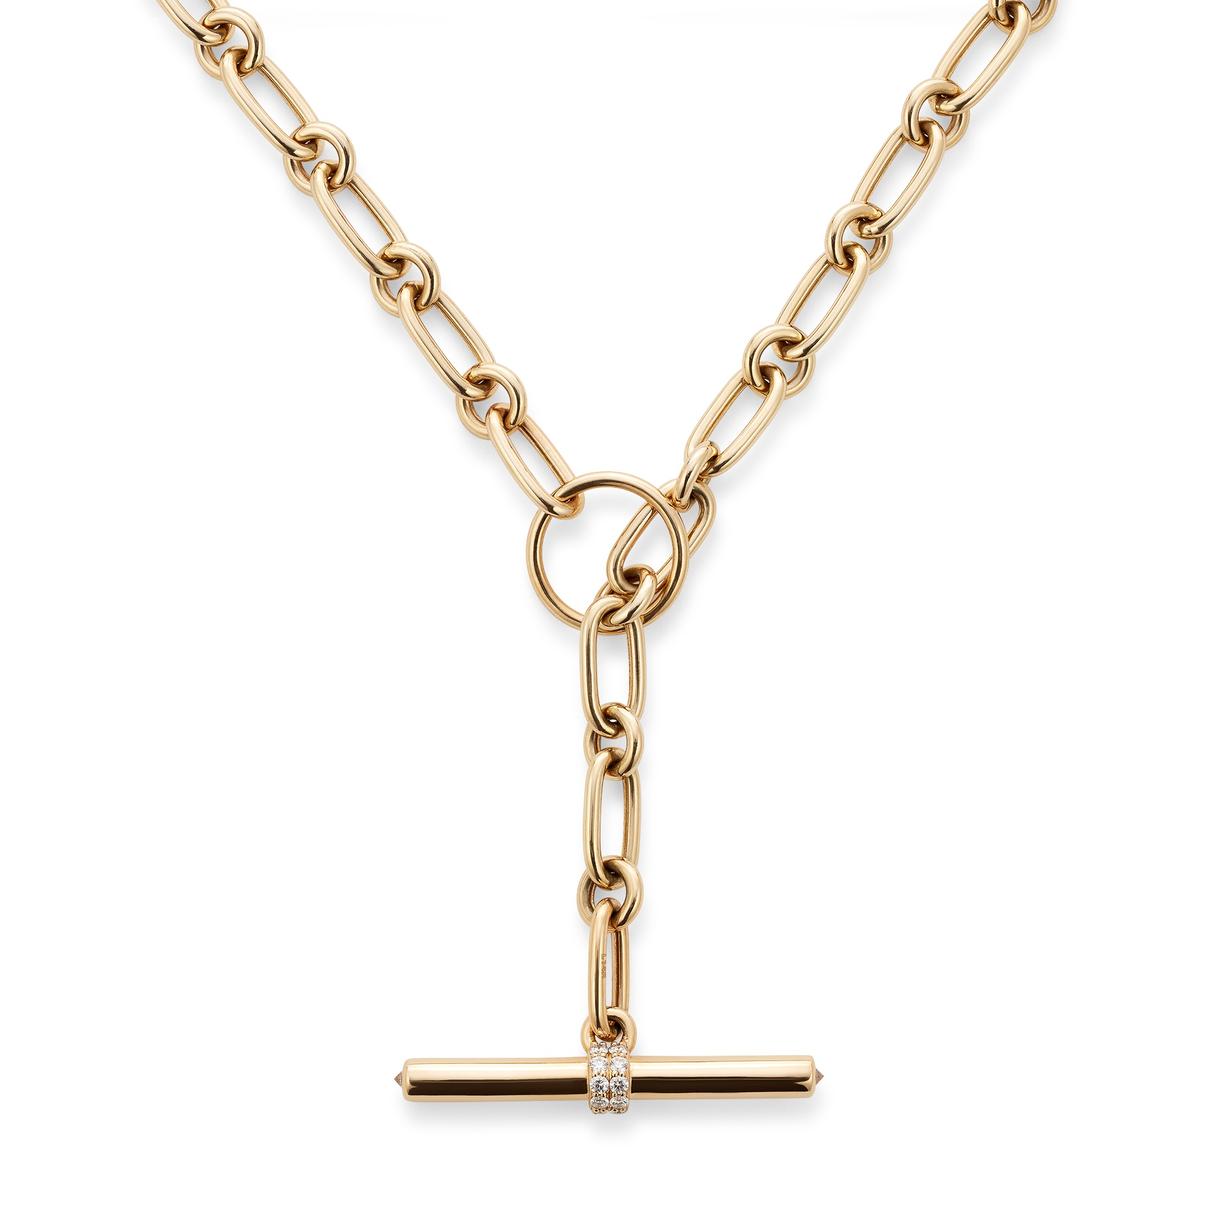 G. Label by goop Charlie Toggle Necklace​